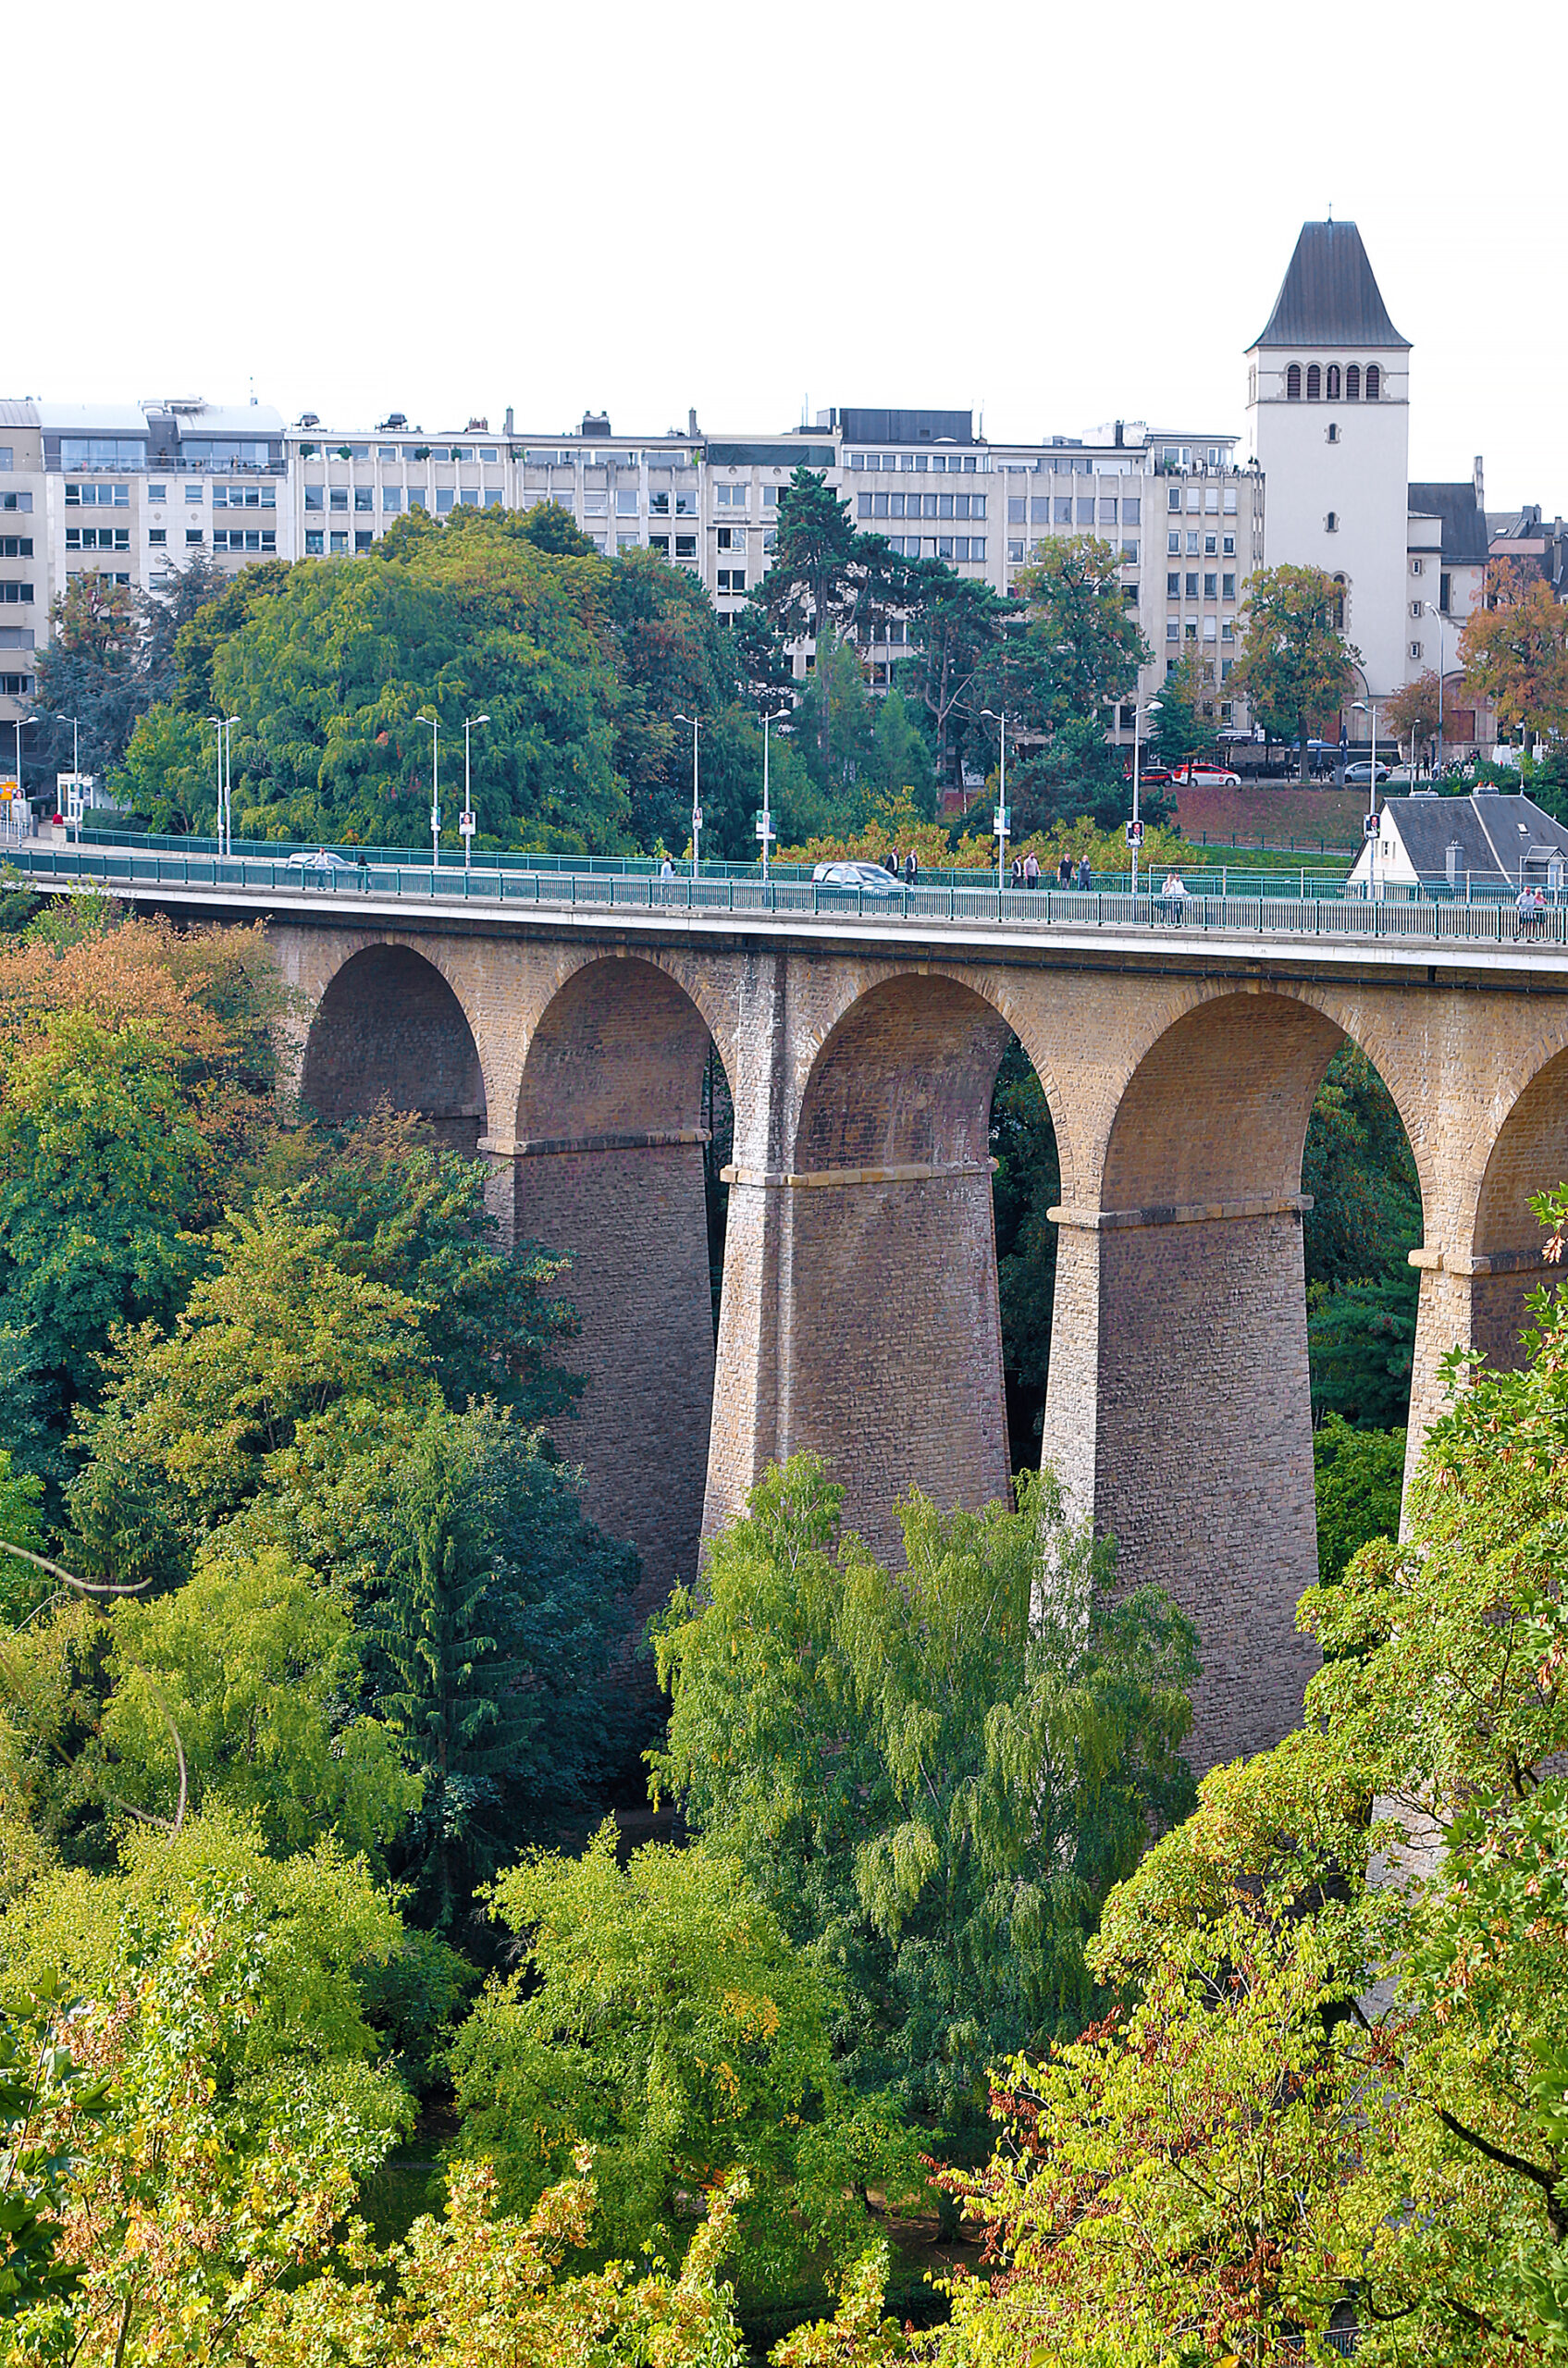 a bridge with many arches and trees